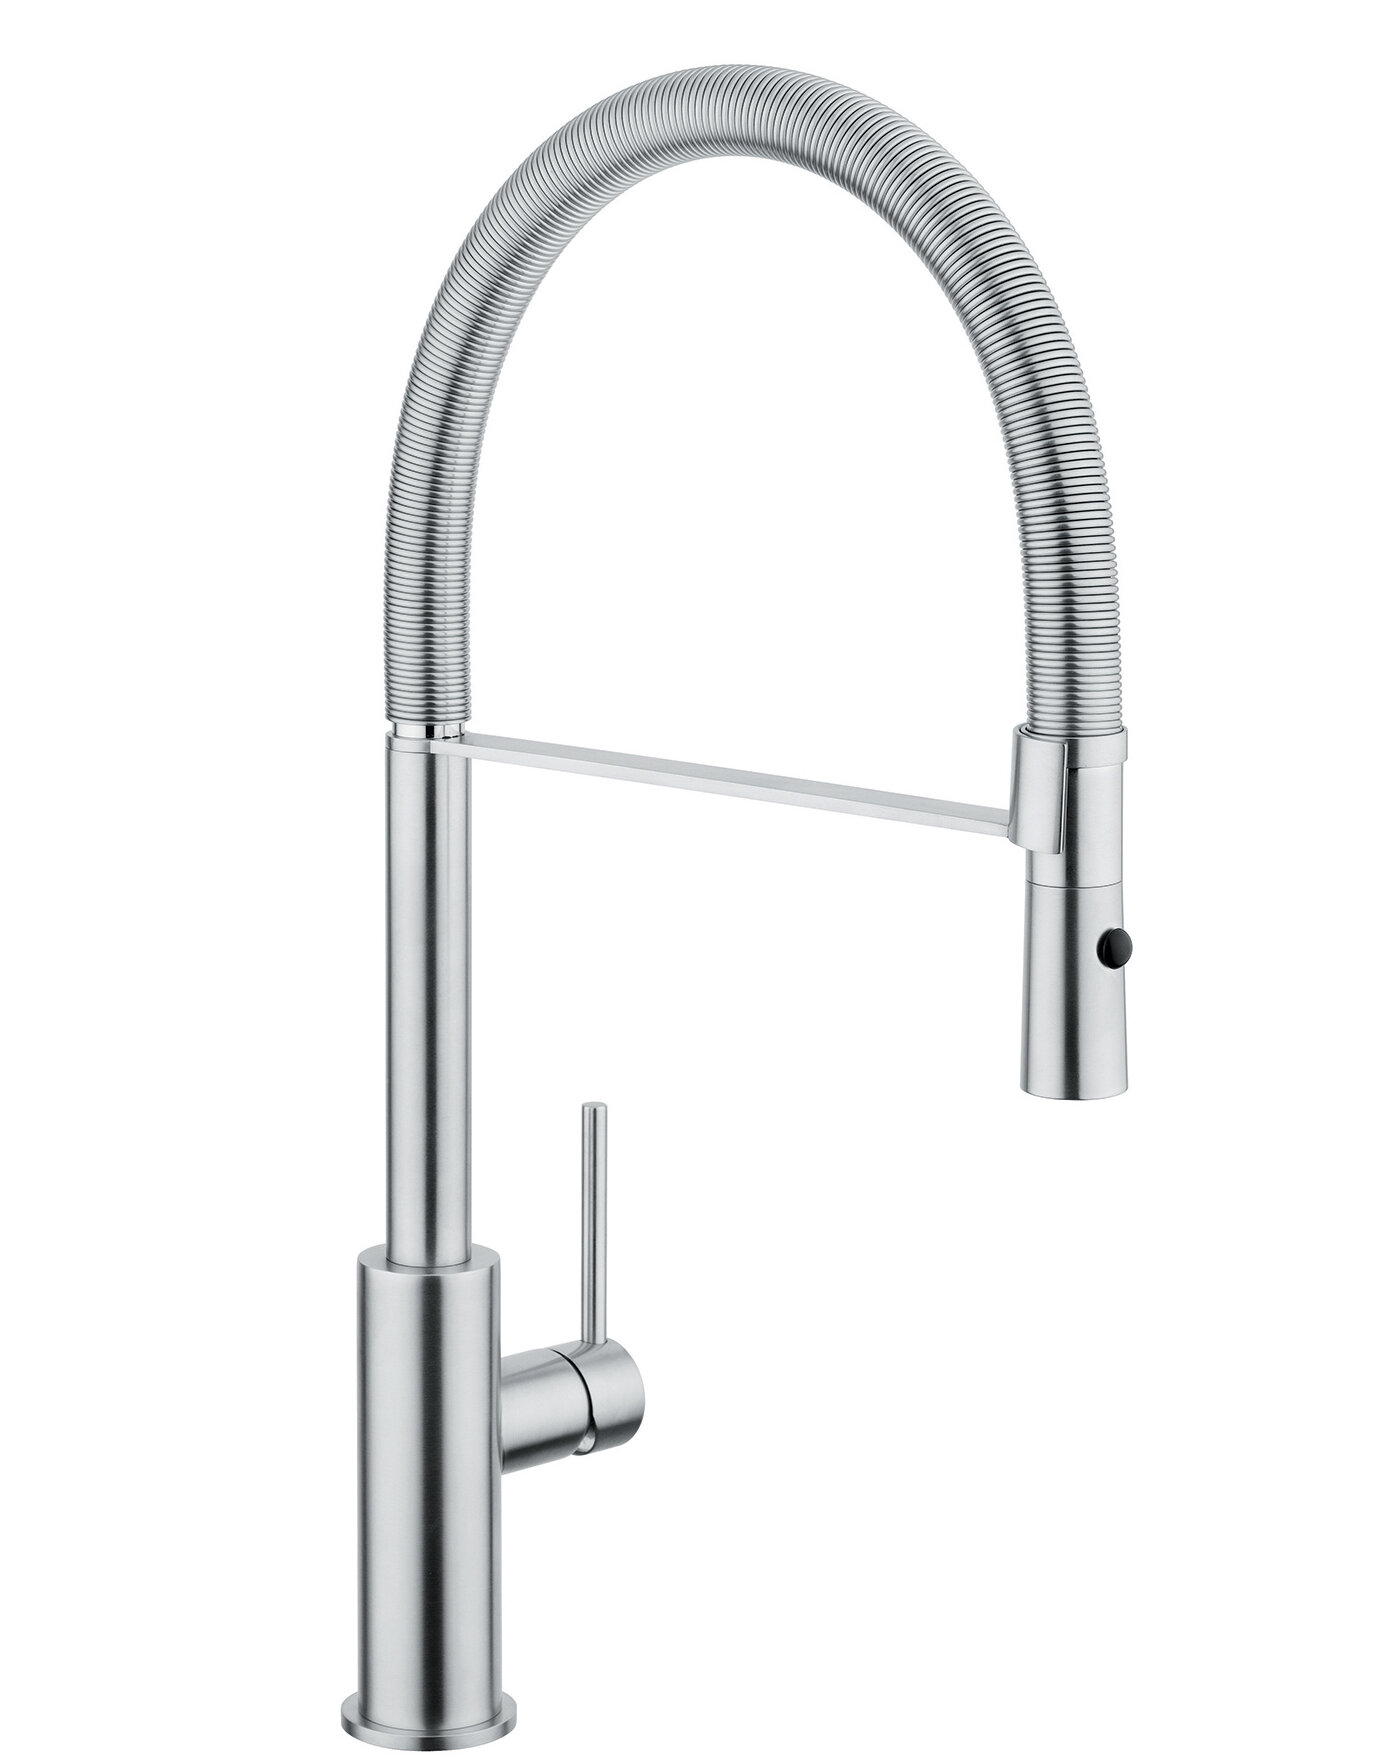 Concinnity Pull Down Single Handle Kitchen Faucet Wayfair